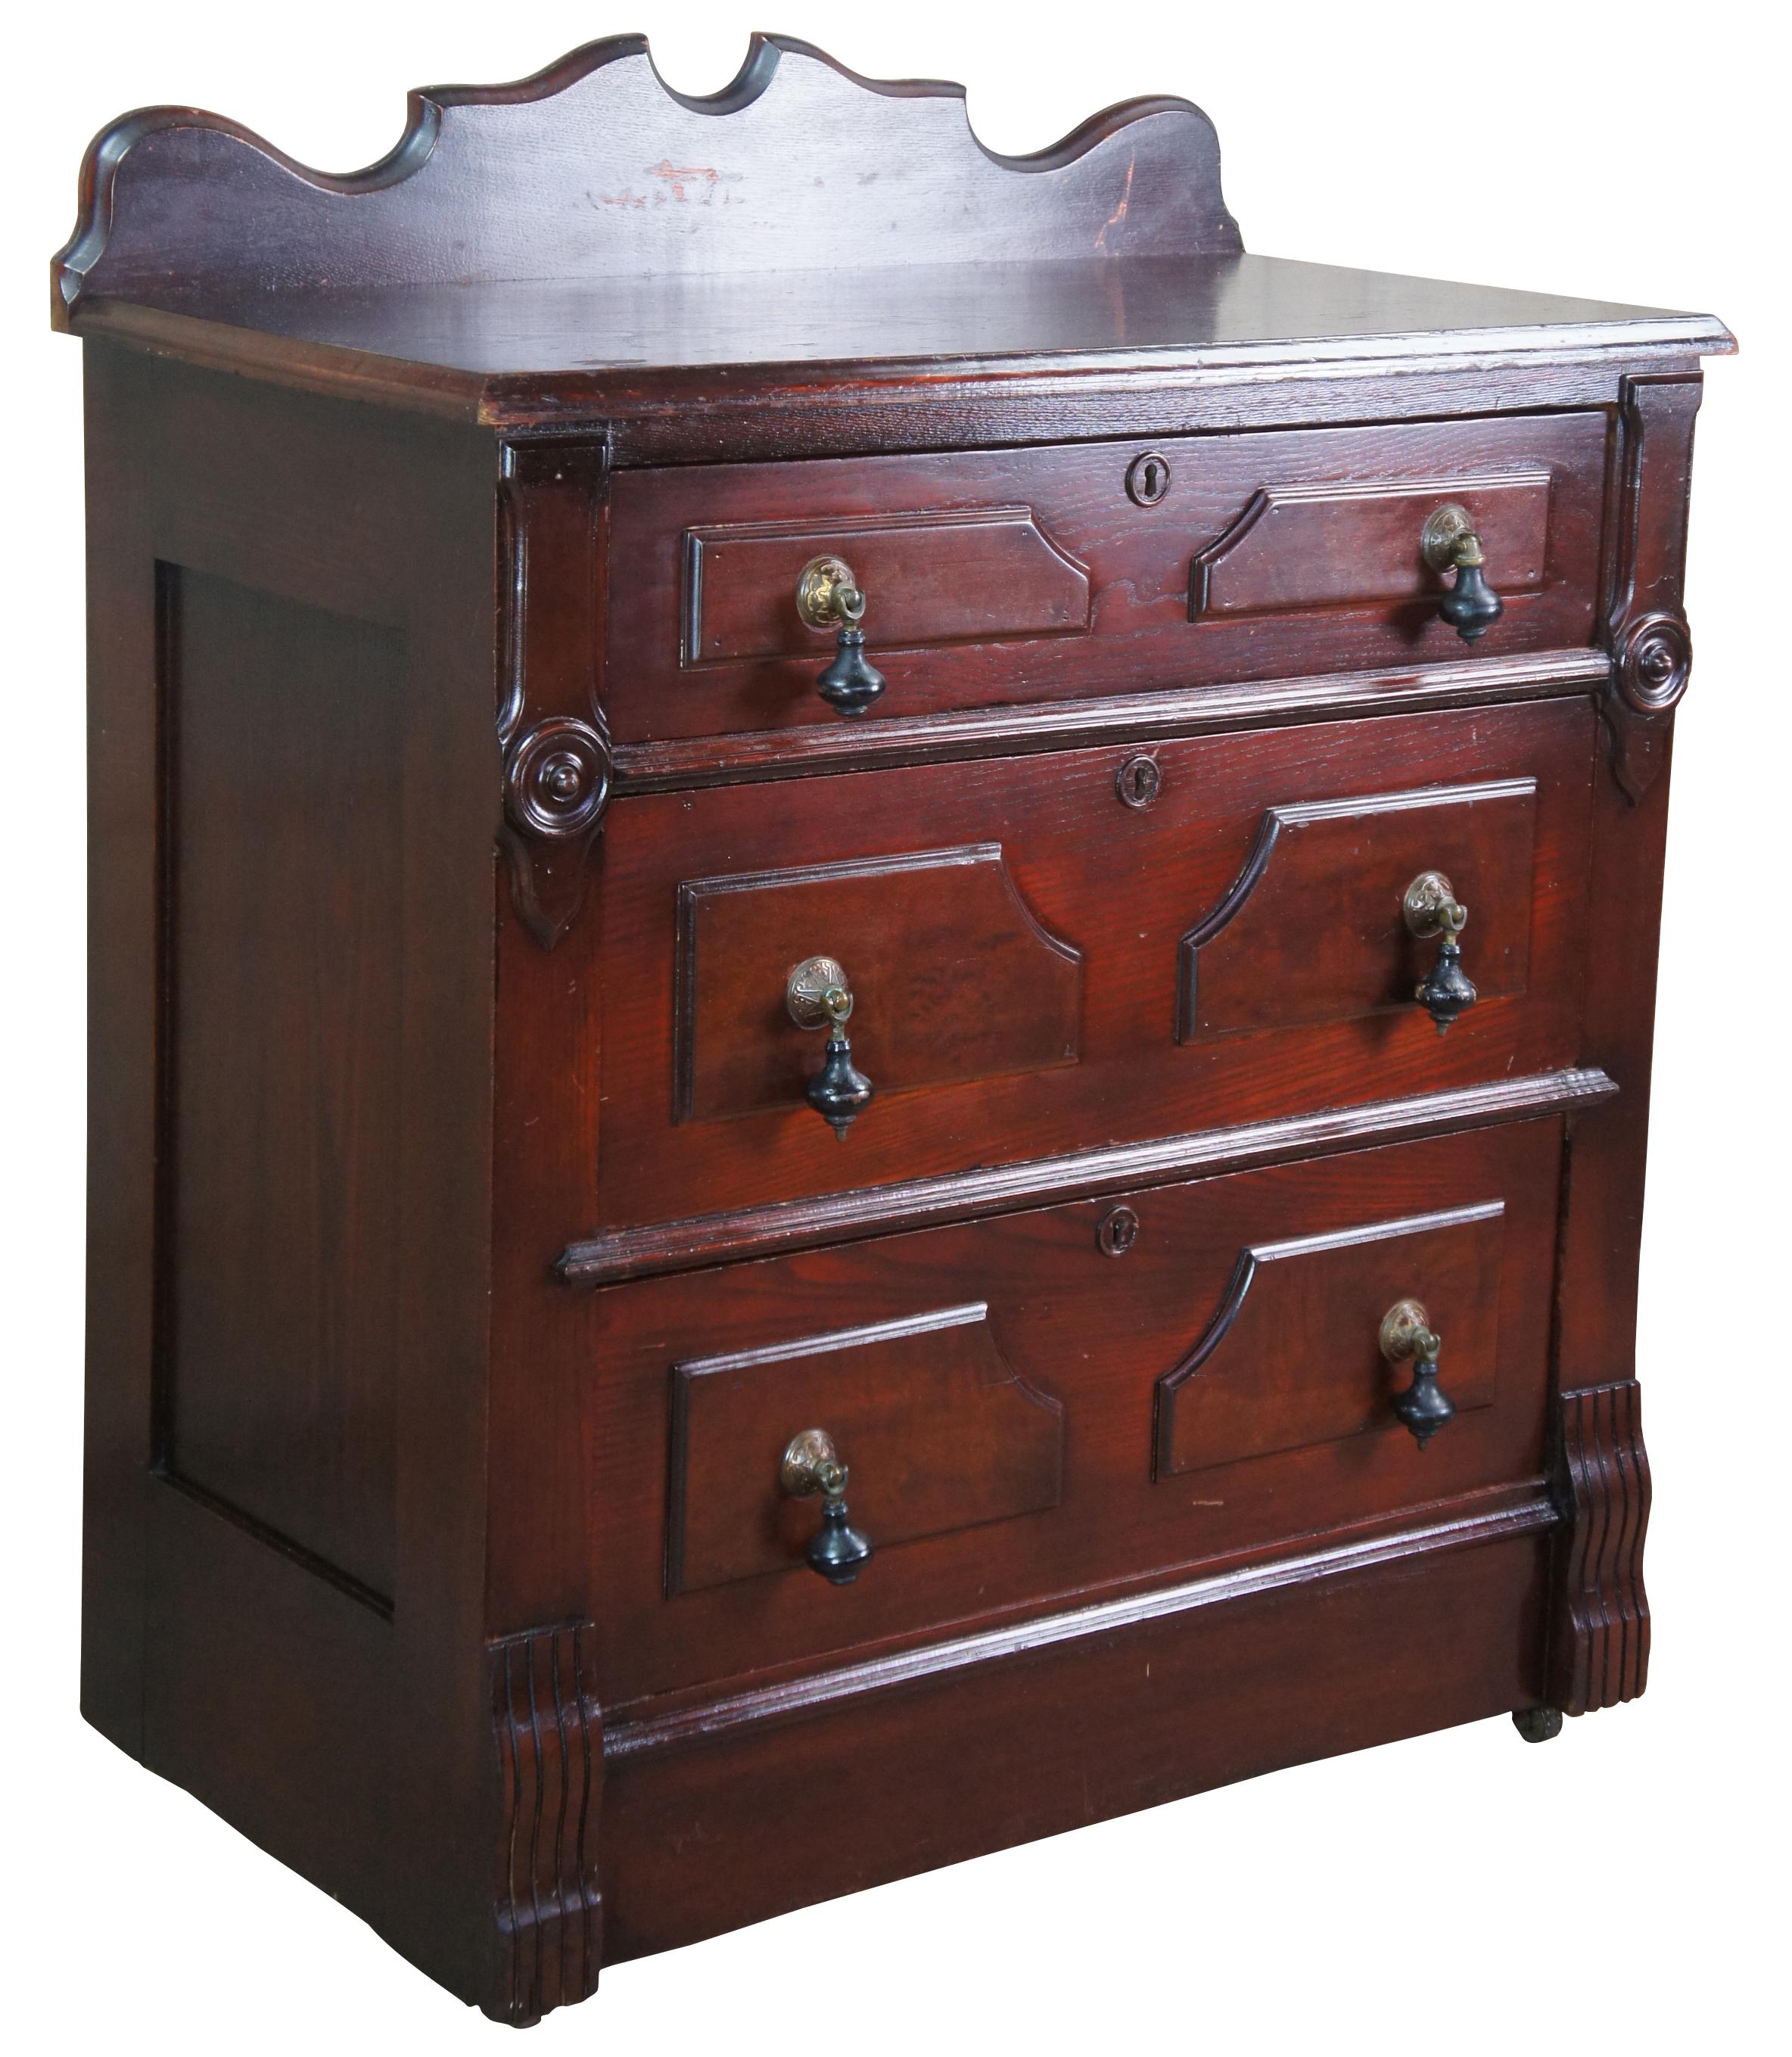 Antique Eastlake Victorian parlor washstand or chest. Made of pine featuring three paneled walnut burl drawers with ebonized teardrop pulls with brass rosettes, carved accents, serpentine backsplash and casters.
          